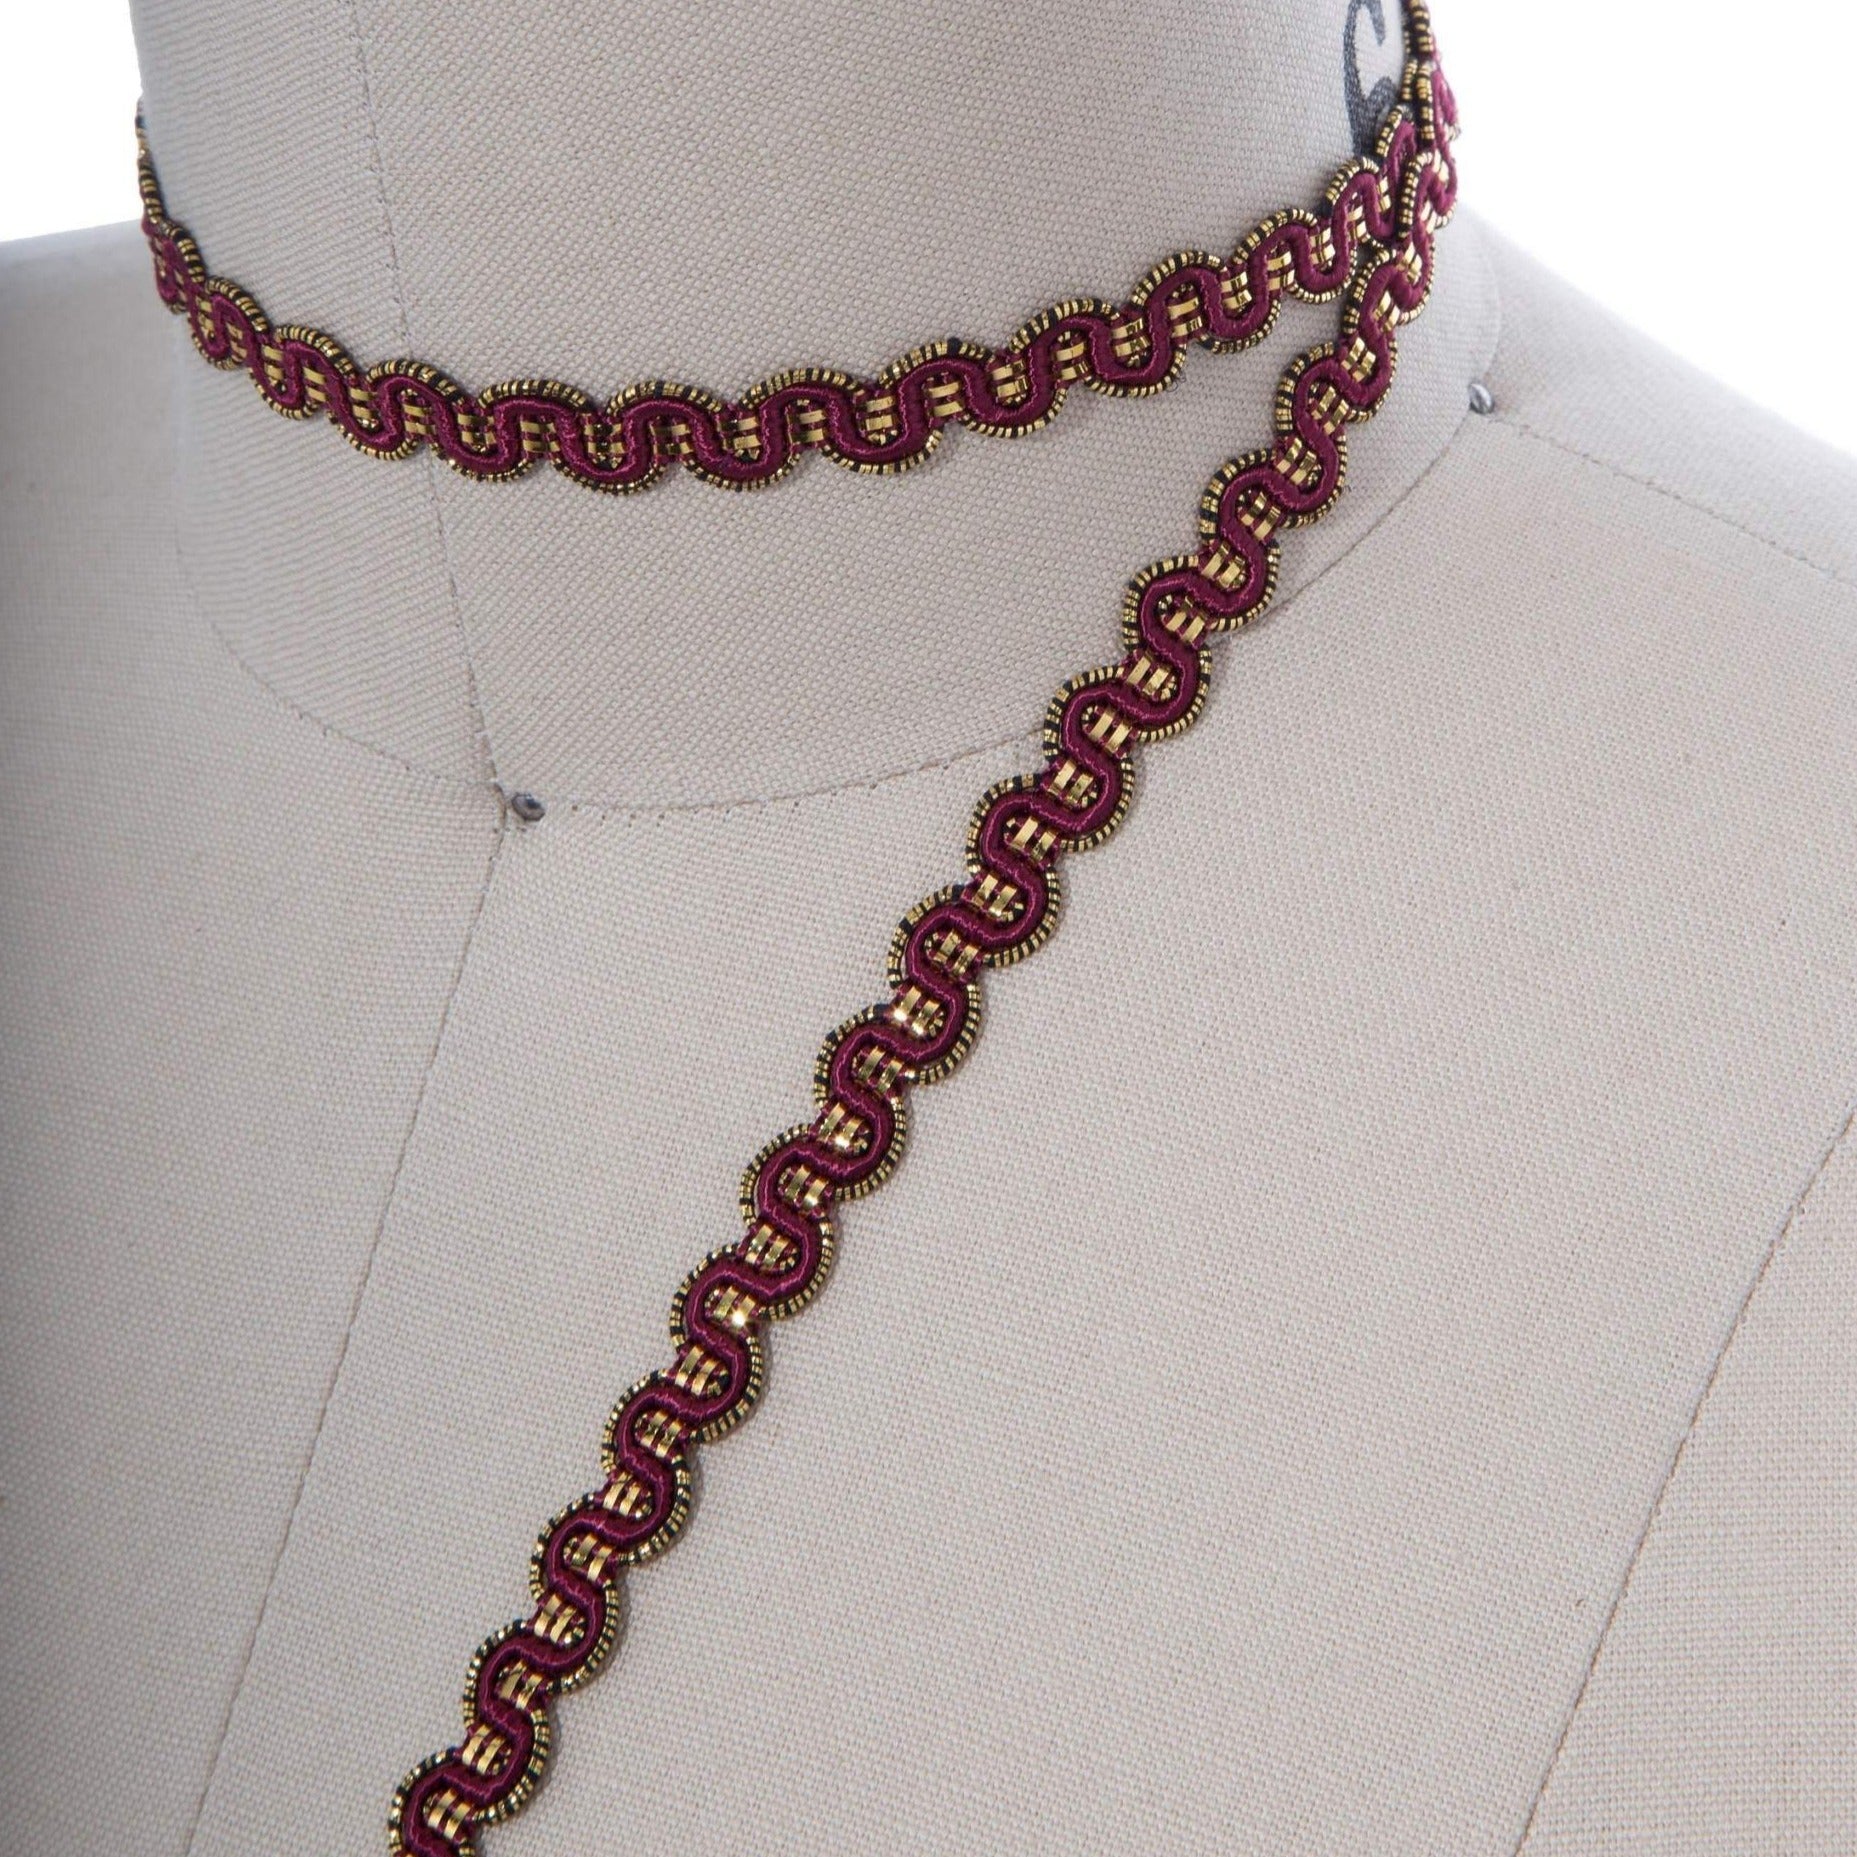 3/8" Maroon and Gold French Upholstery Braided Gimp Trim